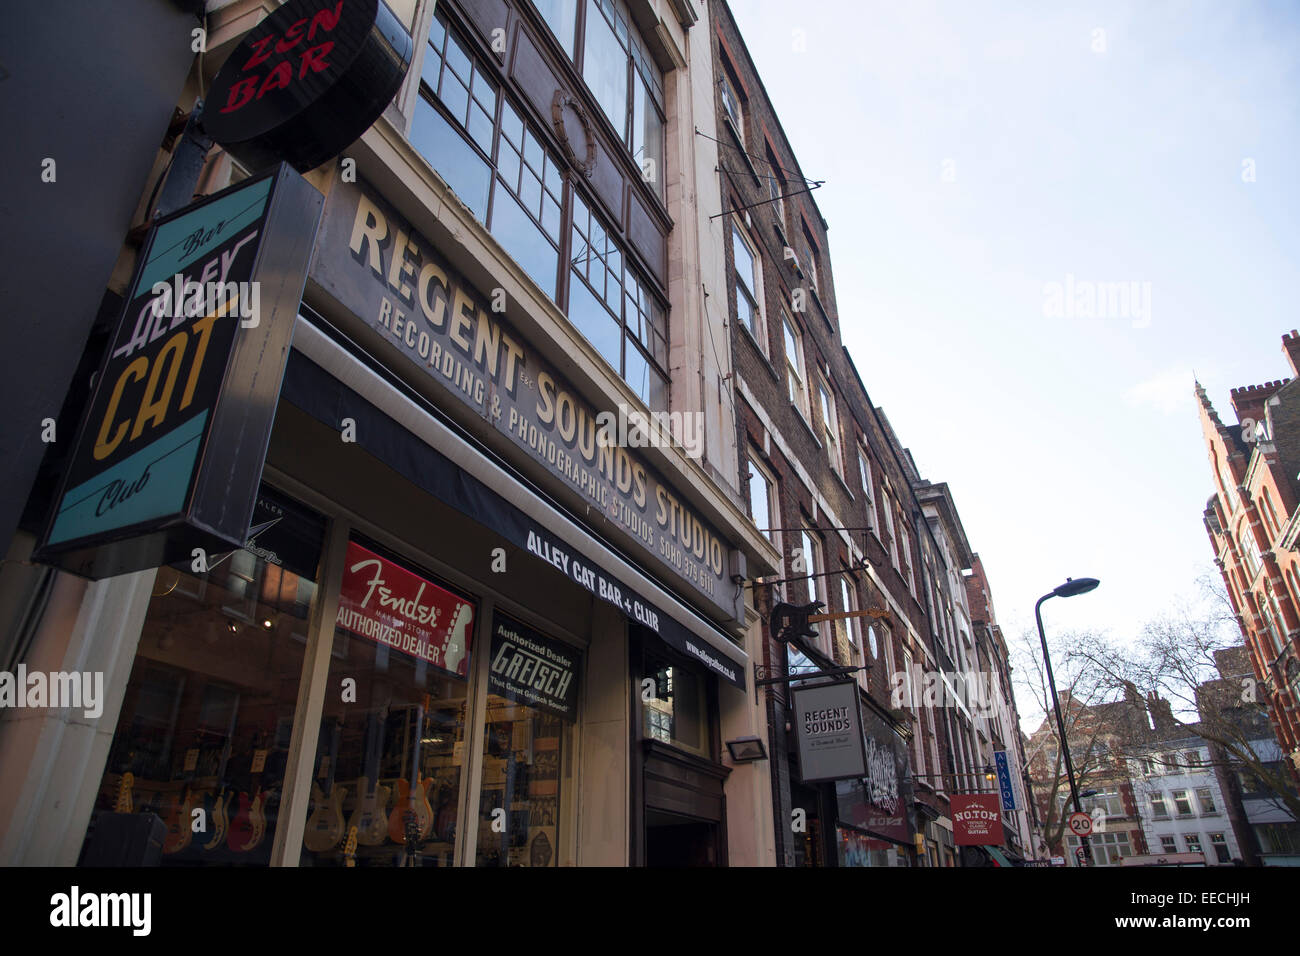 London's historic Denmark Street set for demolition to make way for Crossrail underground extension works. Stock Photo